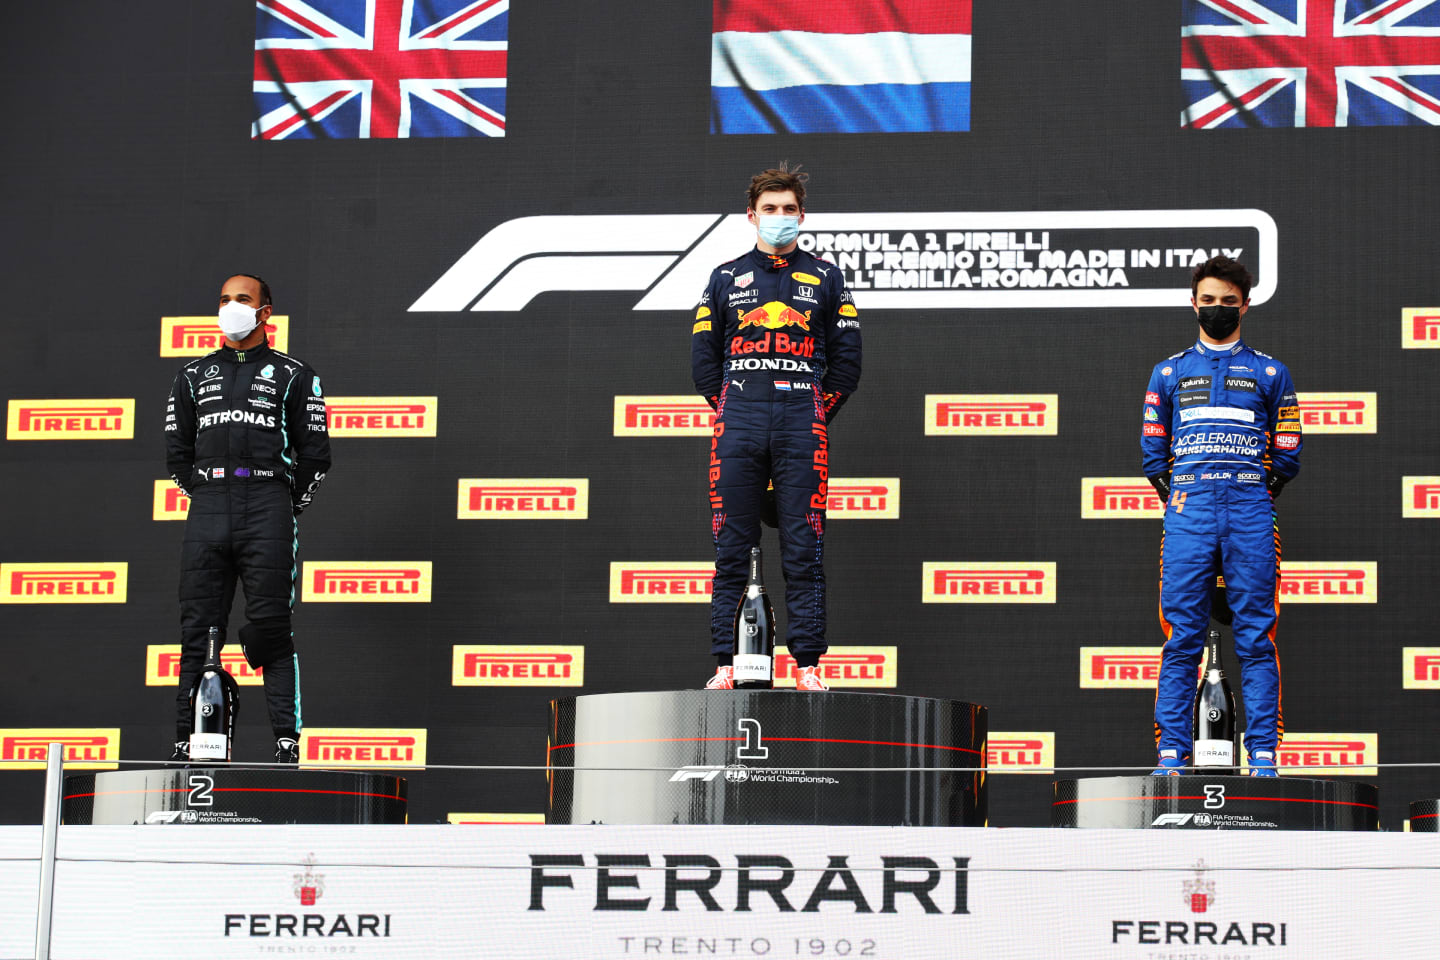 IMOLA, ITALY - APRIL 18: Second placed Lewis Hamilton of Great Britain and Mercedes GP, race winner